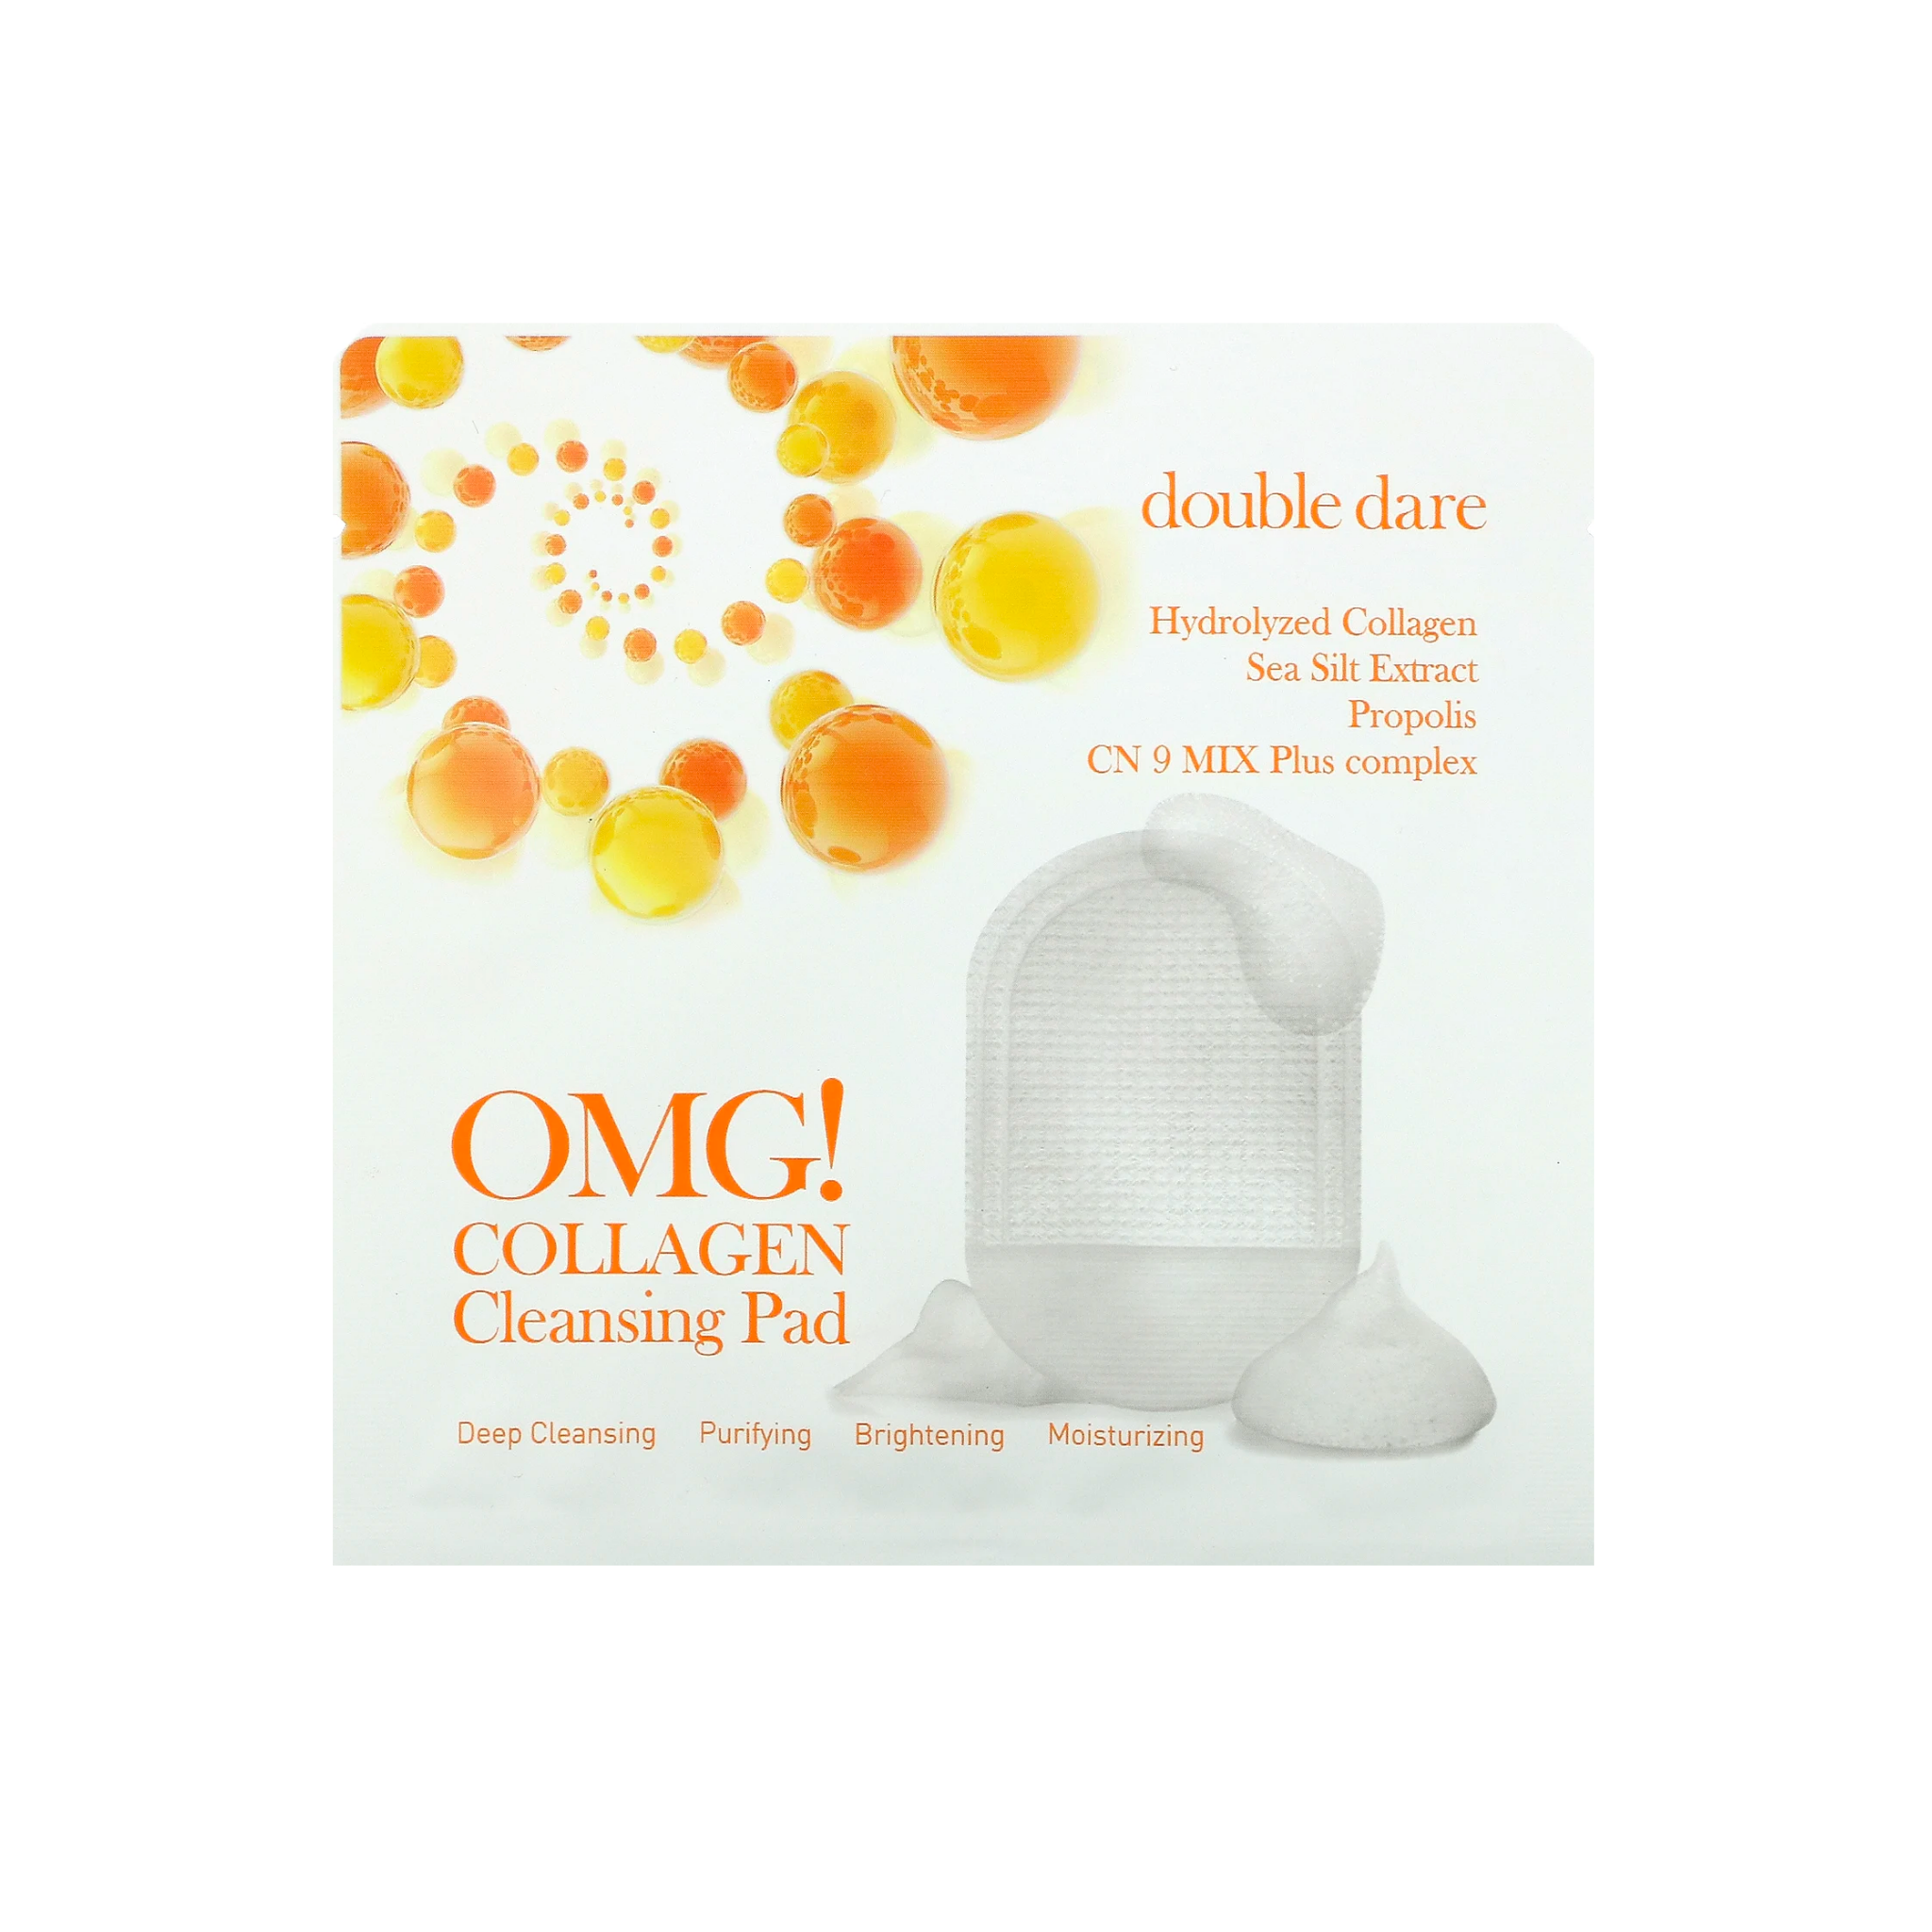 OMG! COLLAGEN CLEANSING PAD